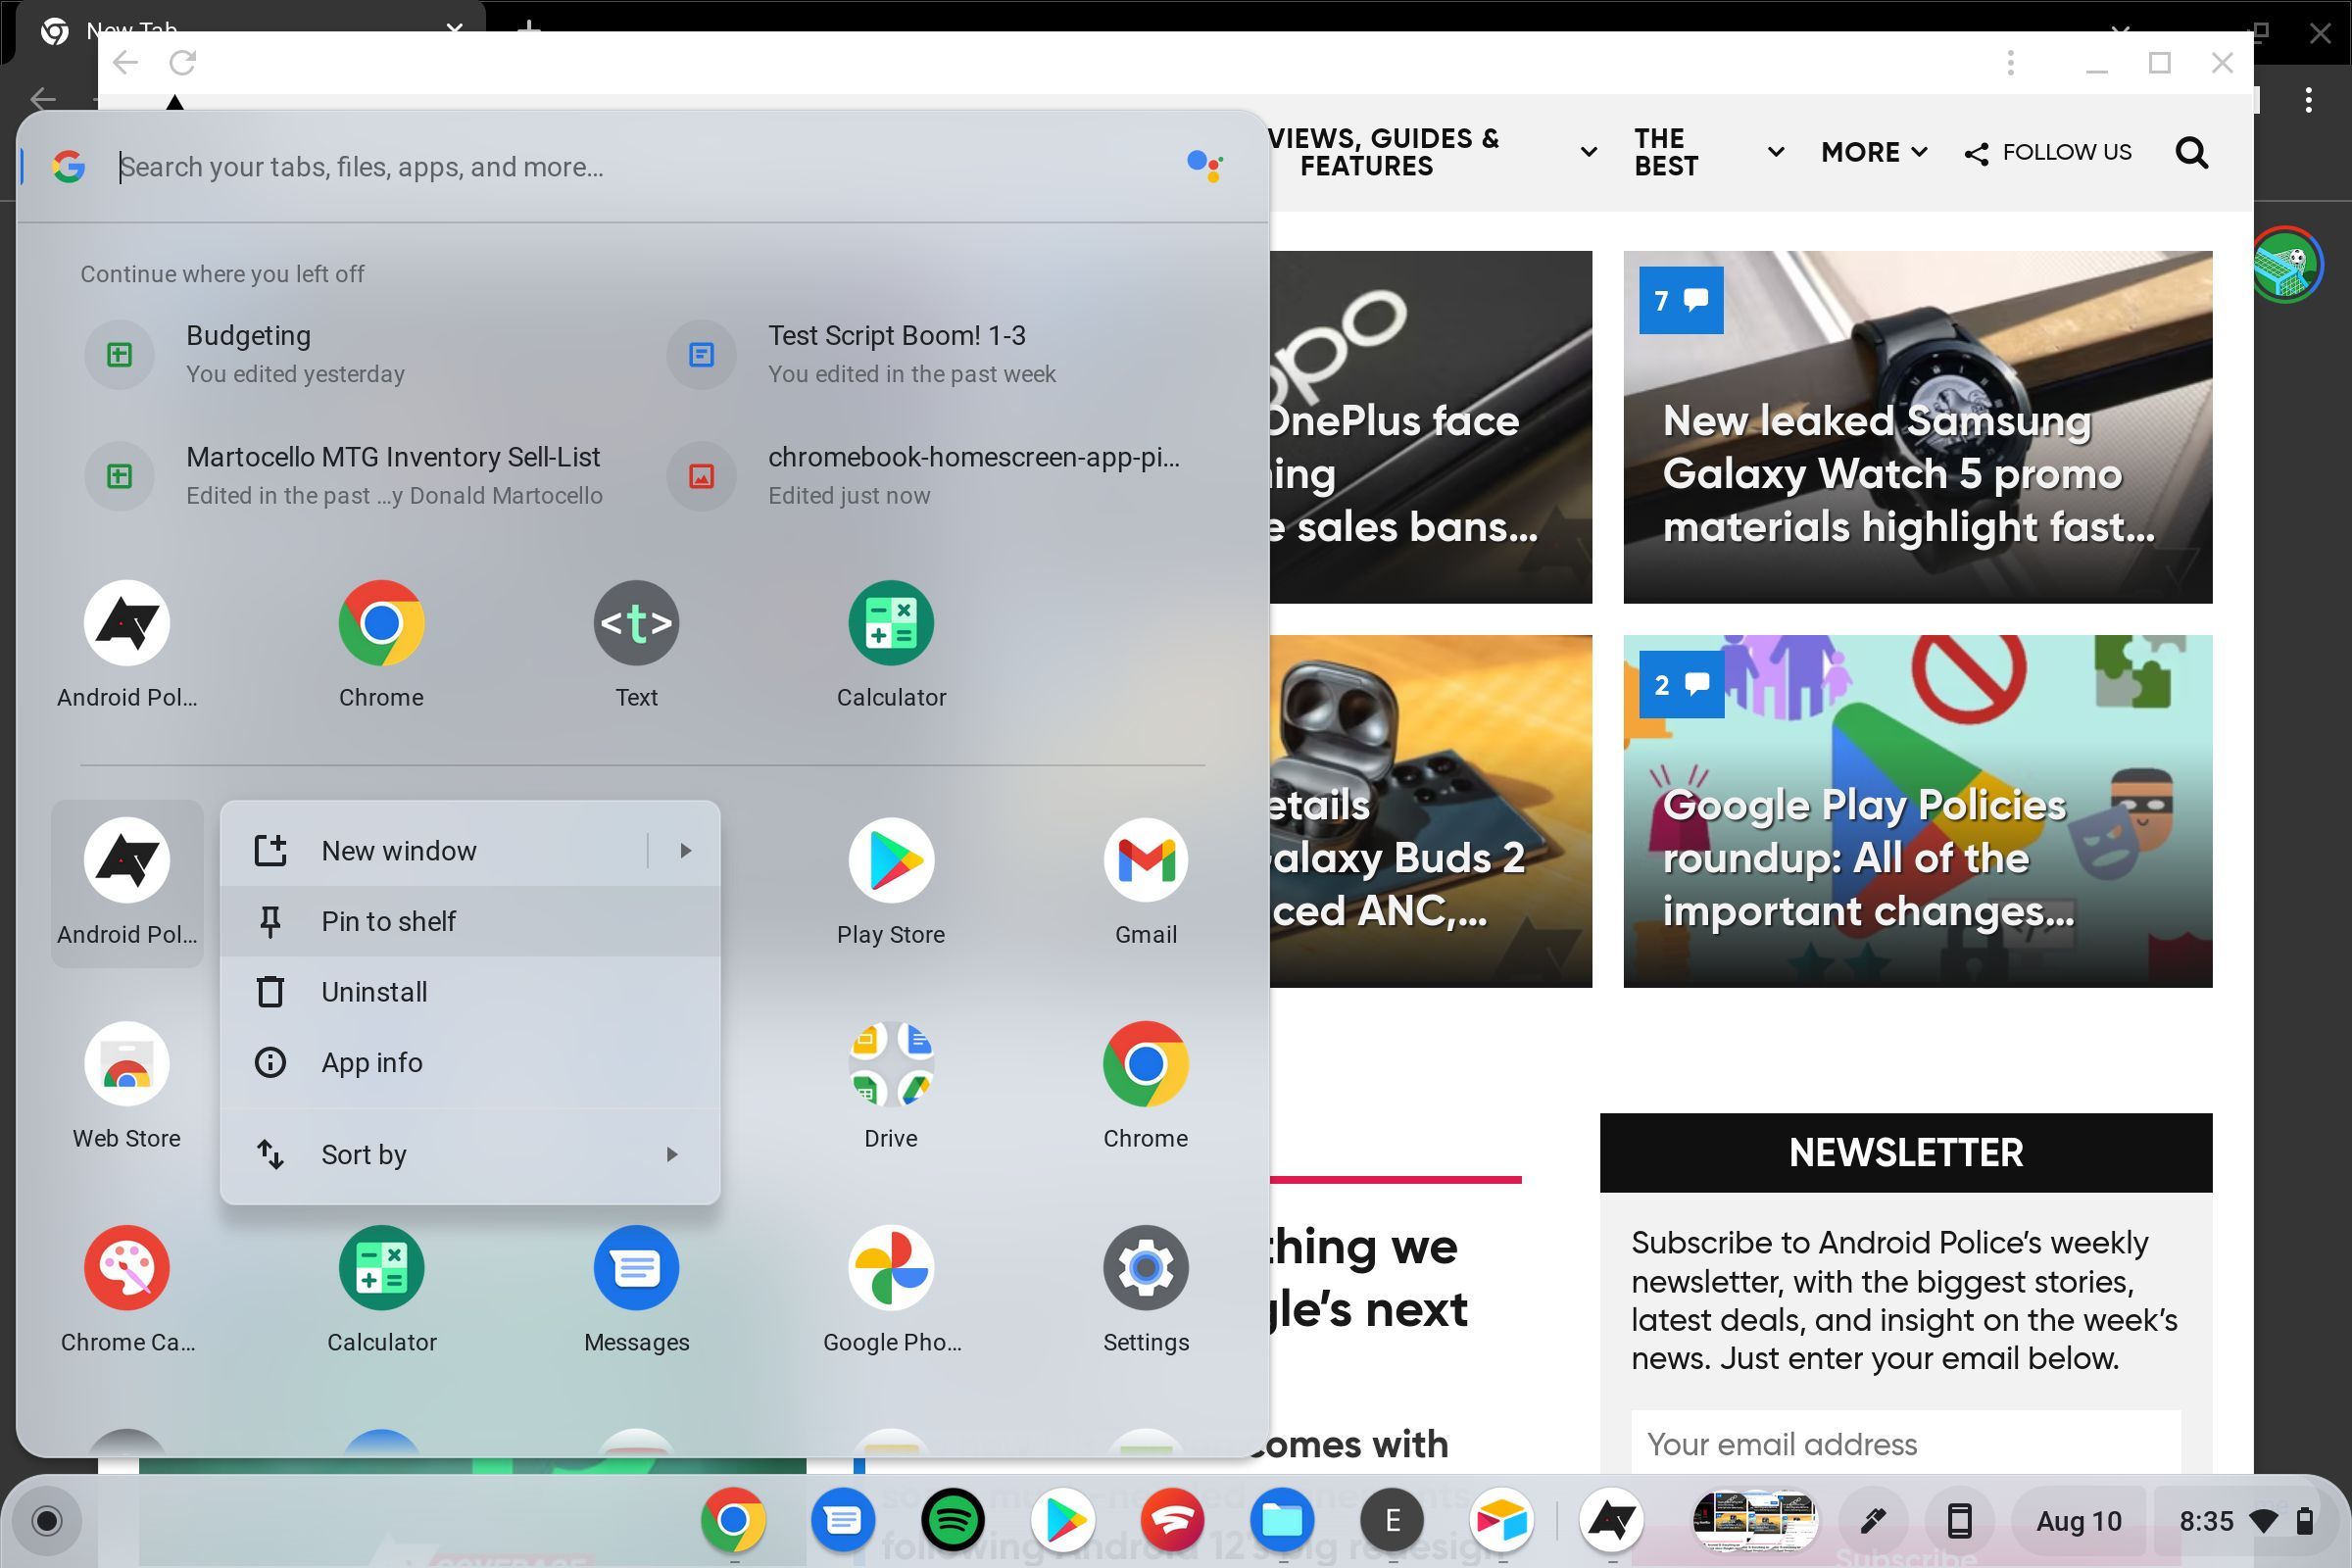 A highlighted website shortcut in the launcher being pinned to the shelf.